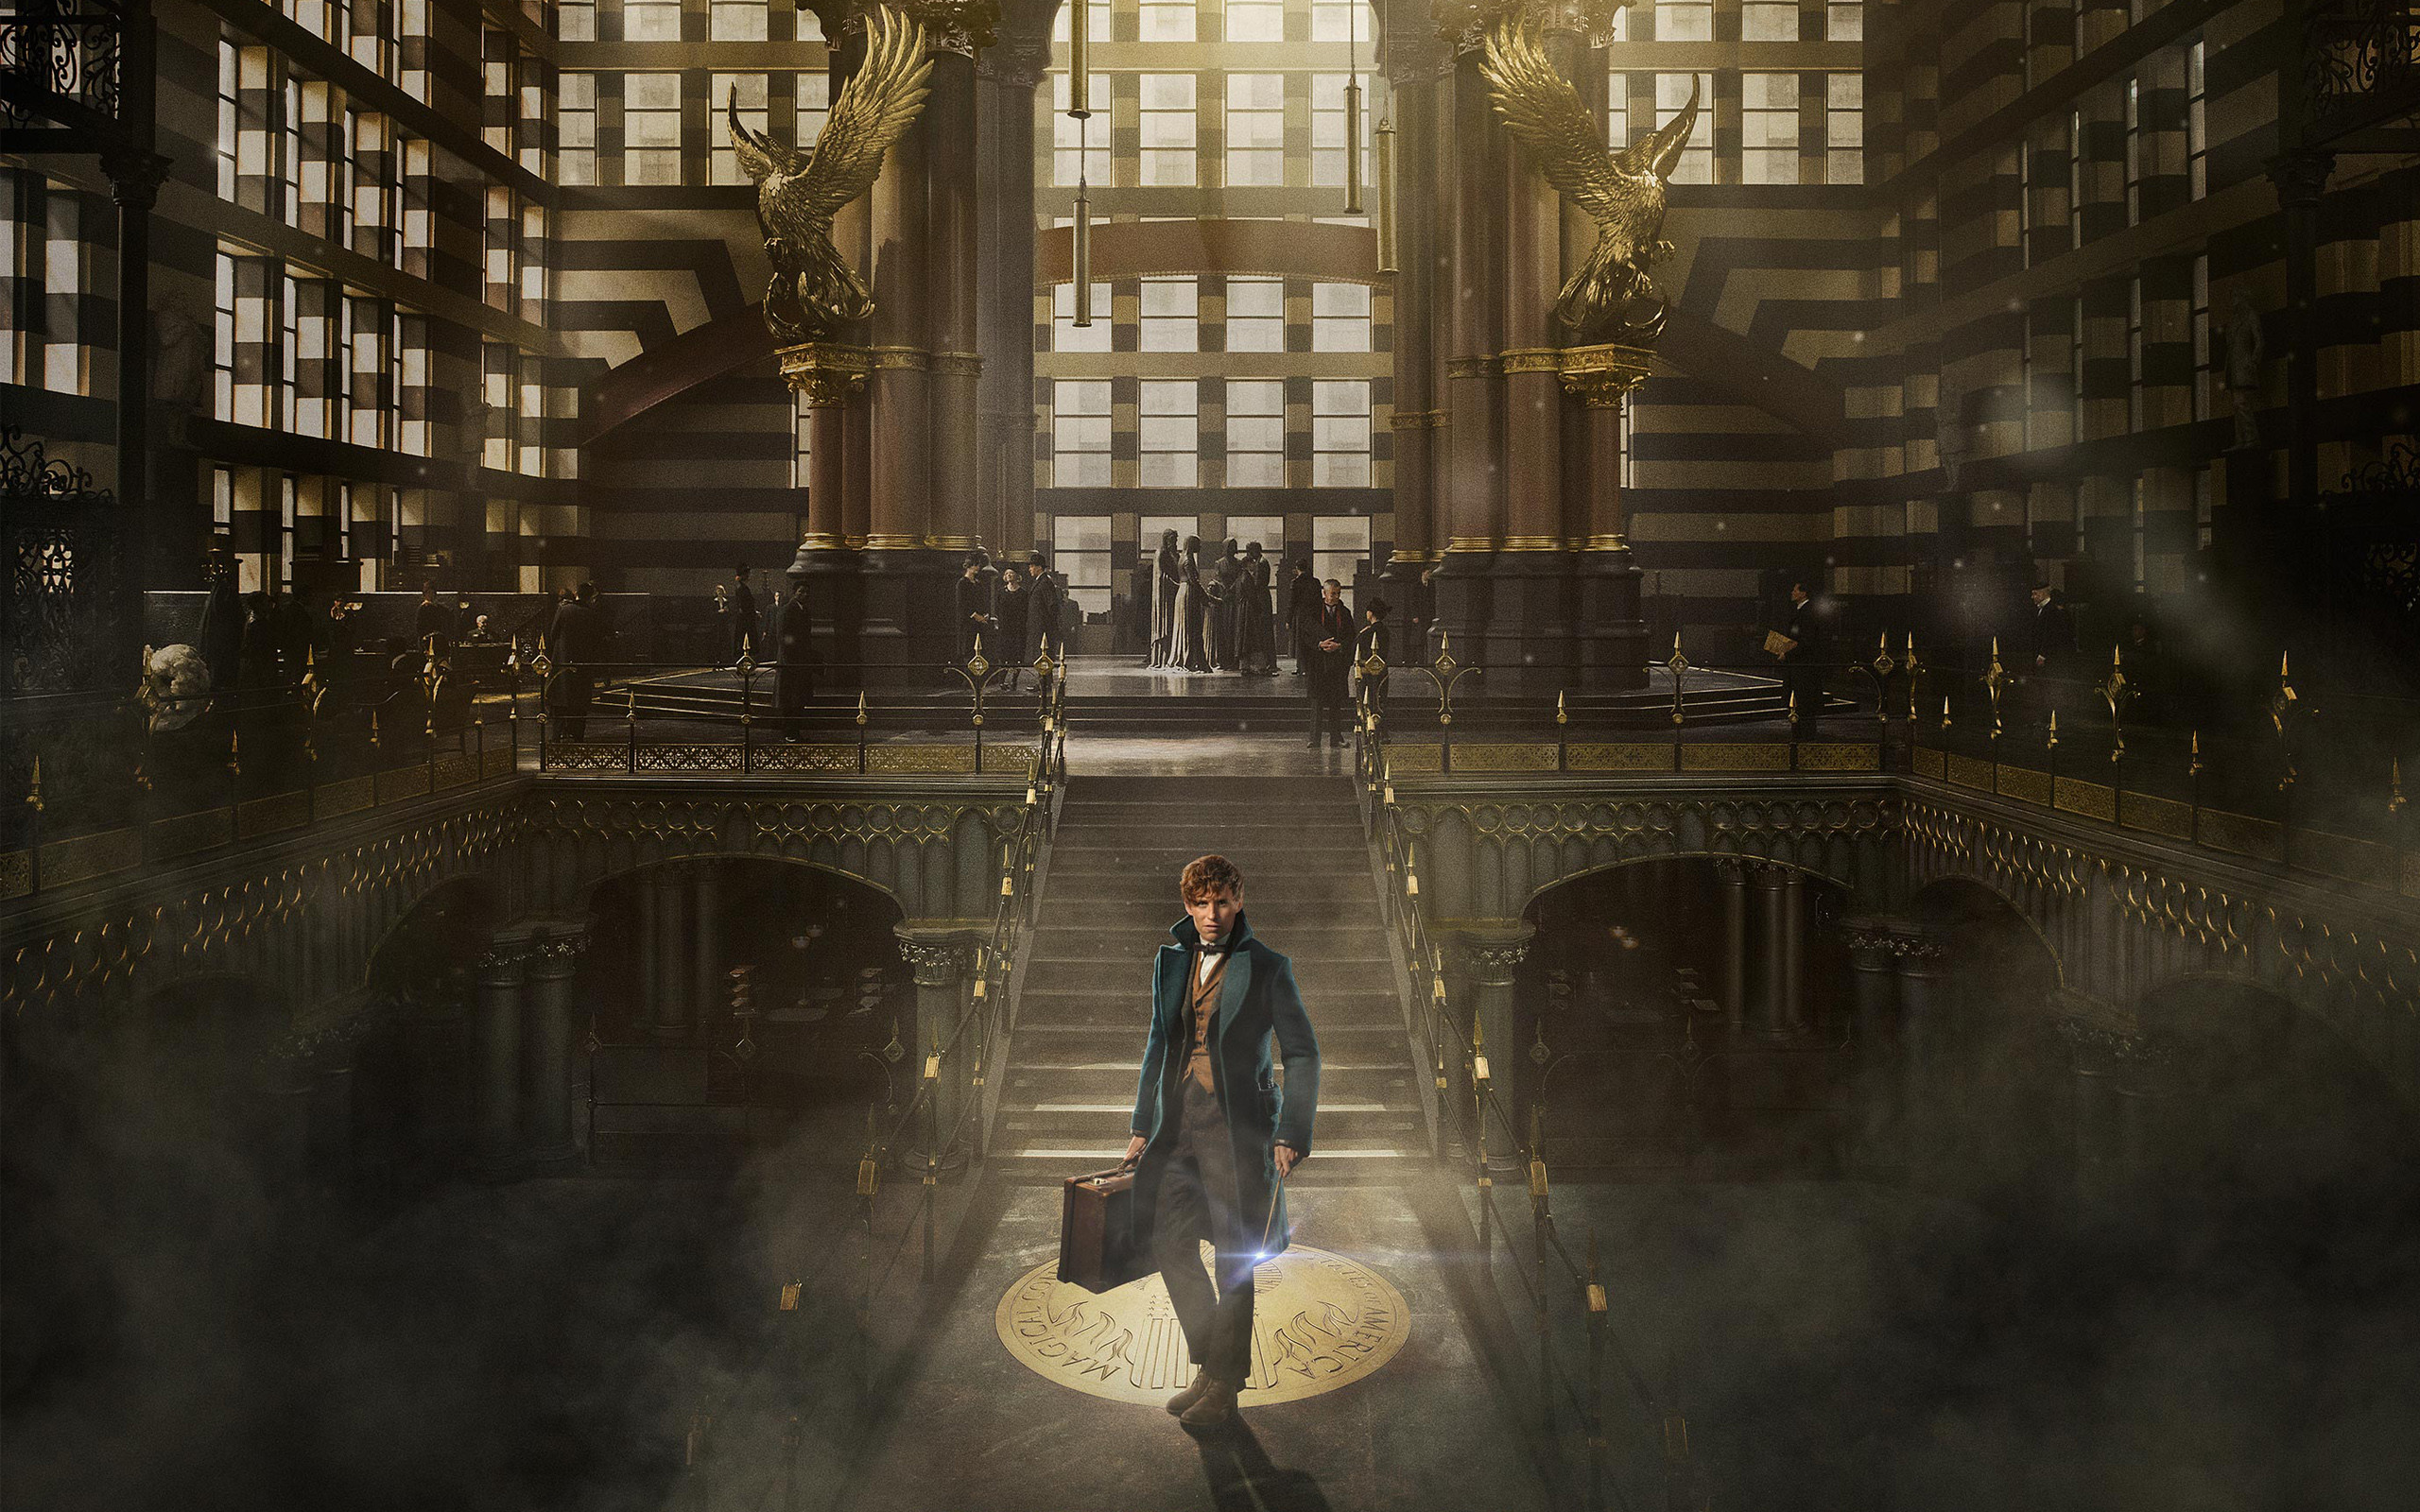 2560x1600 Fantastic Beasts and Where to Find Them 2016 wallpaper